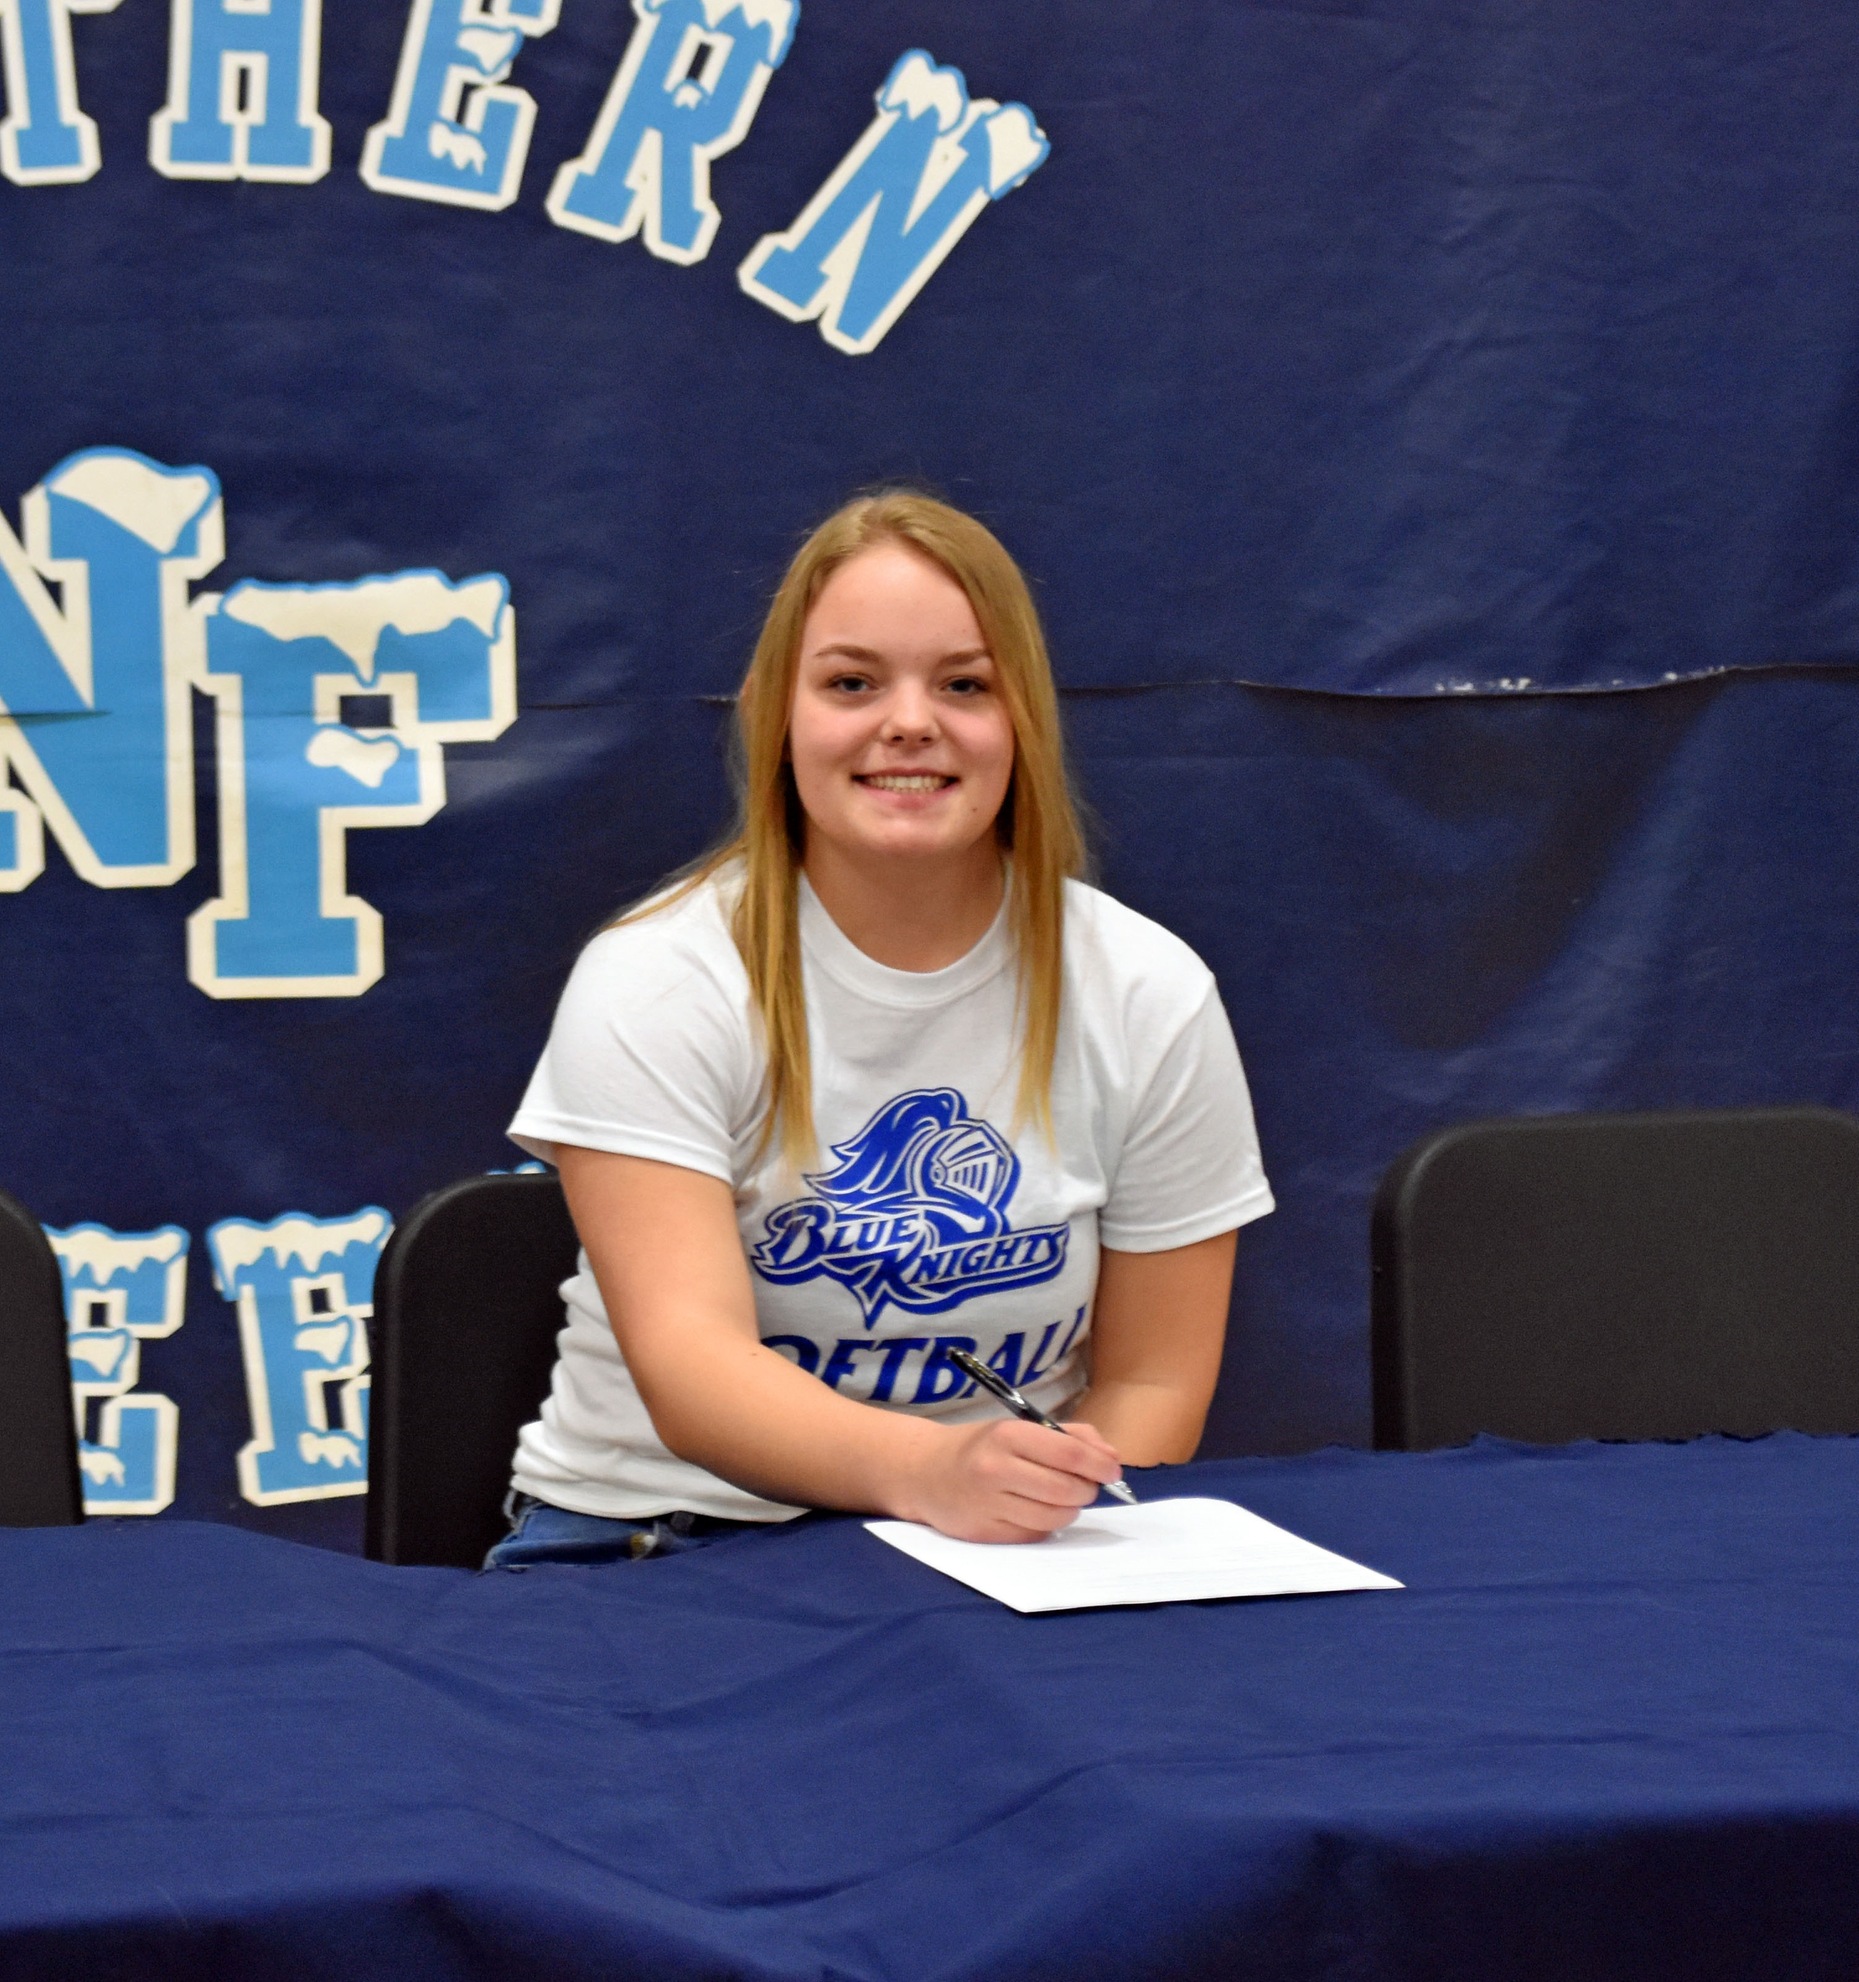 RHIANNON HORIEN SIGNS WITH BLUE KNIGHTS!